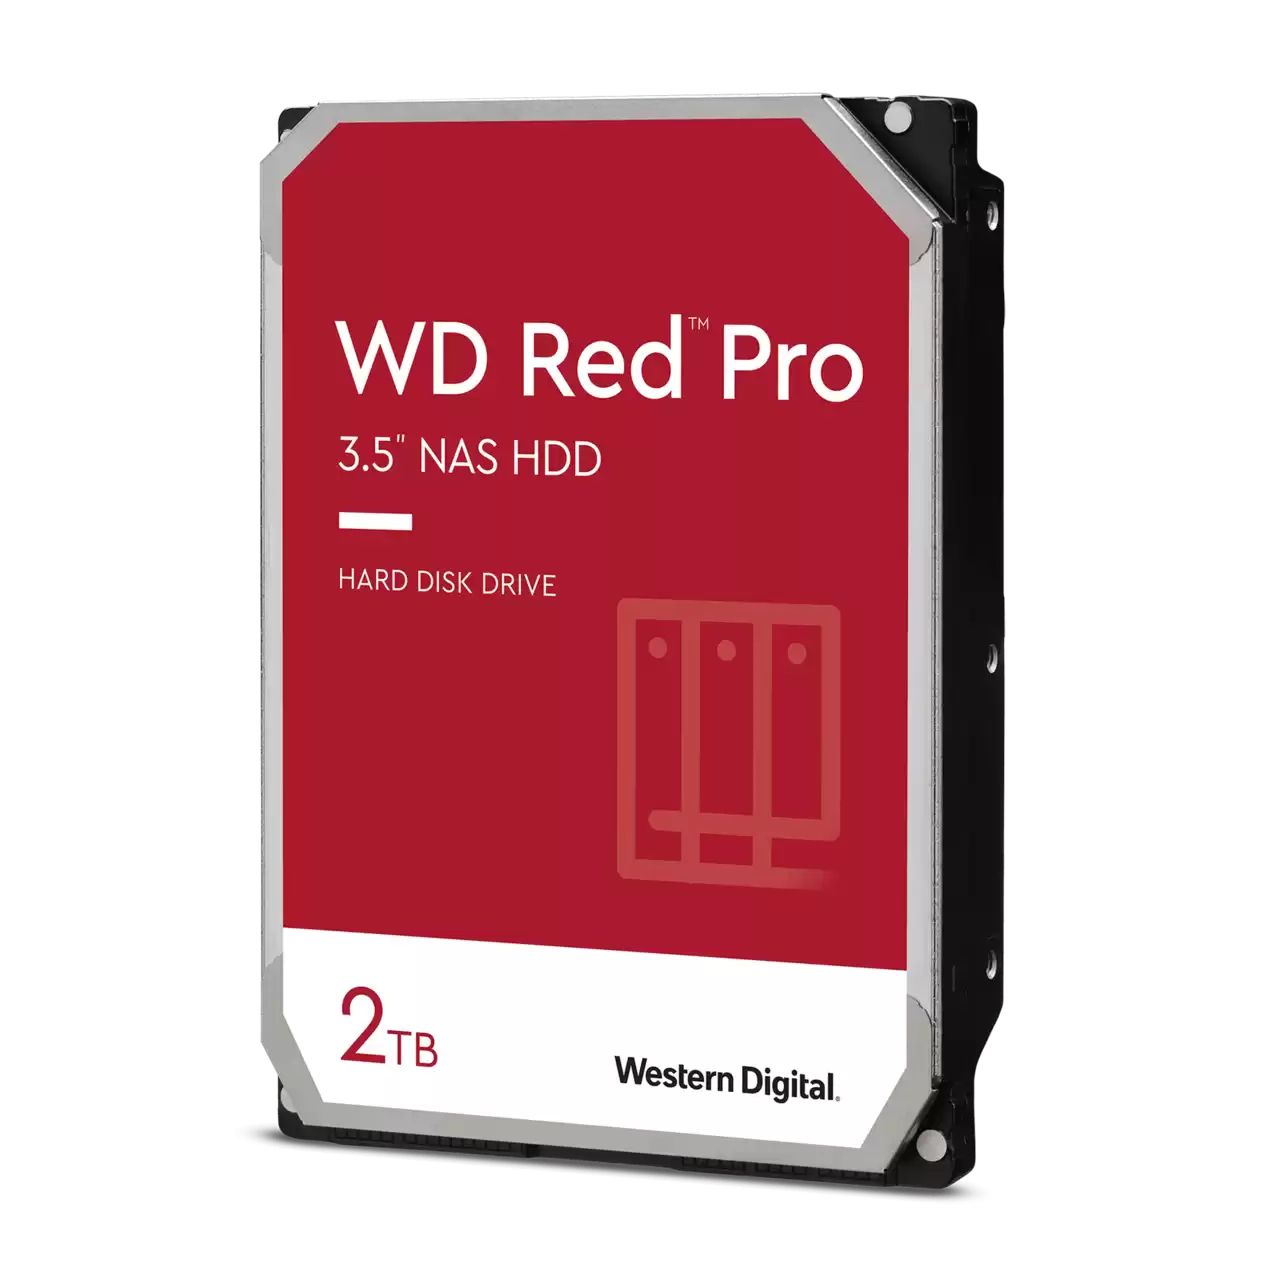 WD142KFGX - Disco WD Red 3.5